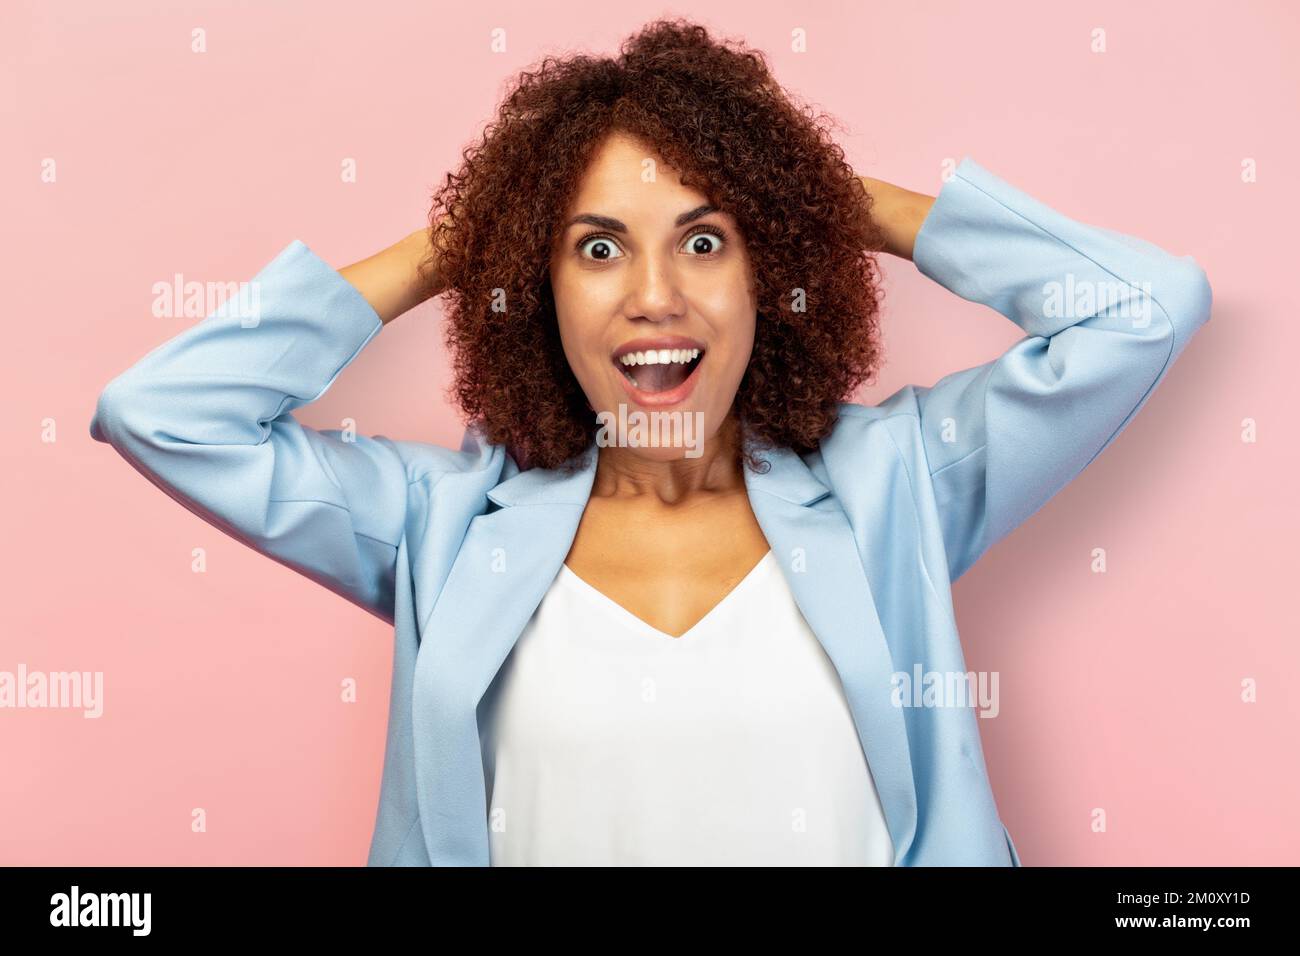 Excited woman overjoyed with new position or job Happy female with curly hair holding her head and screaming  Stock Photo